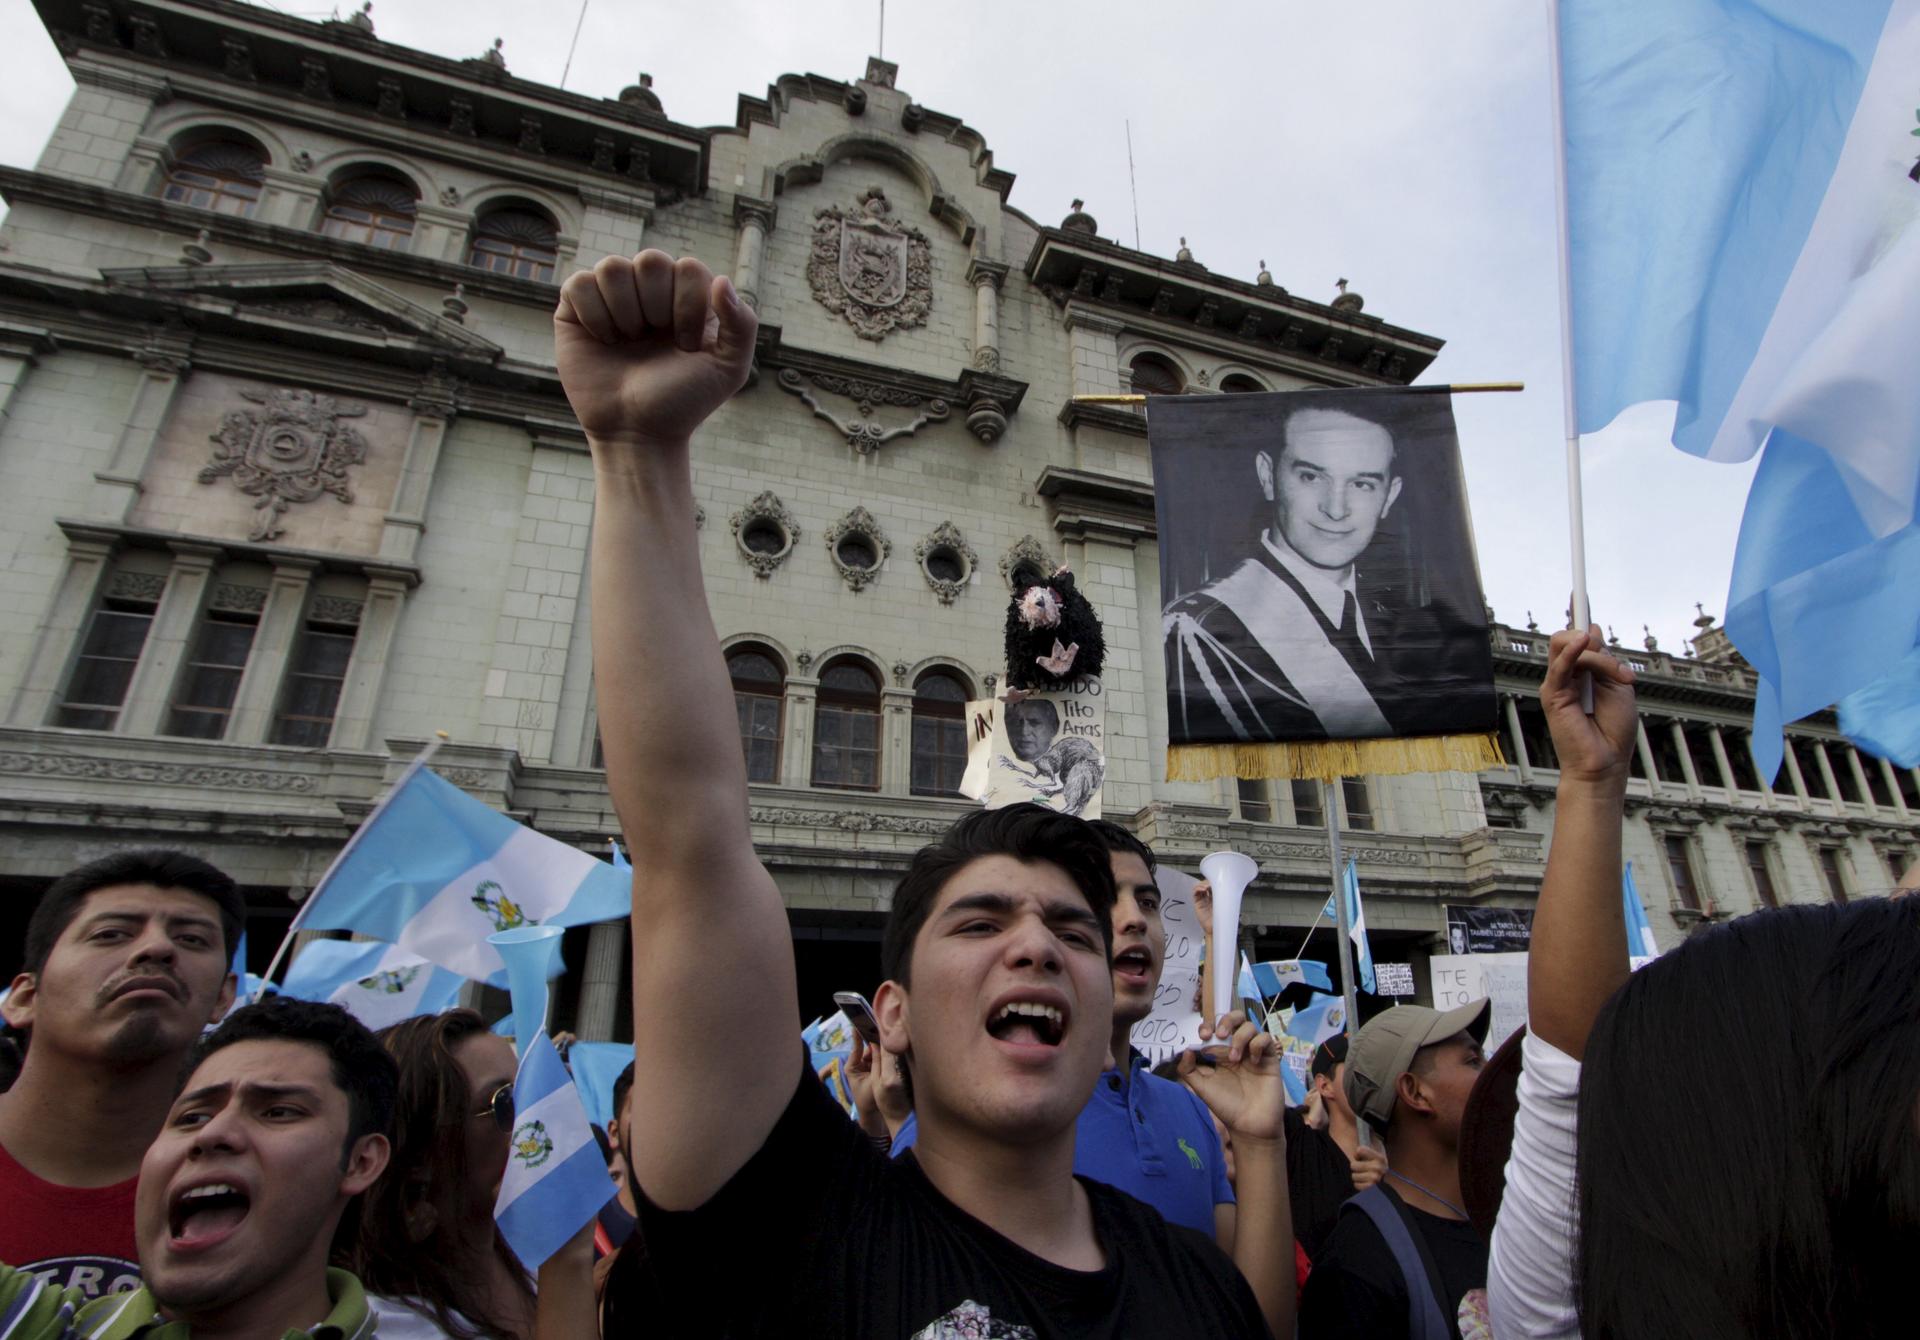 Demonstrators shout as they hold Guatemalan national flags and a picture of former Guatemalan President Jacobo Arbenz, during a protest against Guatemala's President Otto Perez in Guatemala City, Guatemala, August 22, 2015.